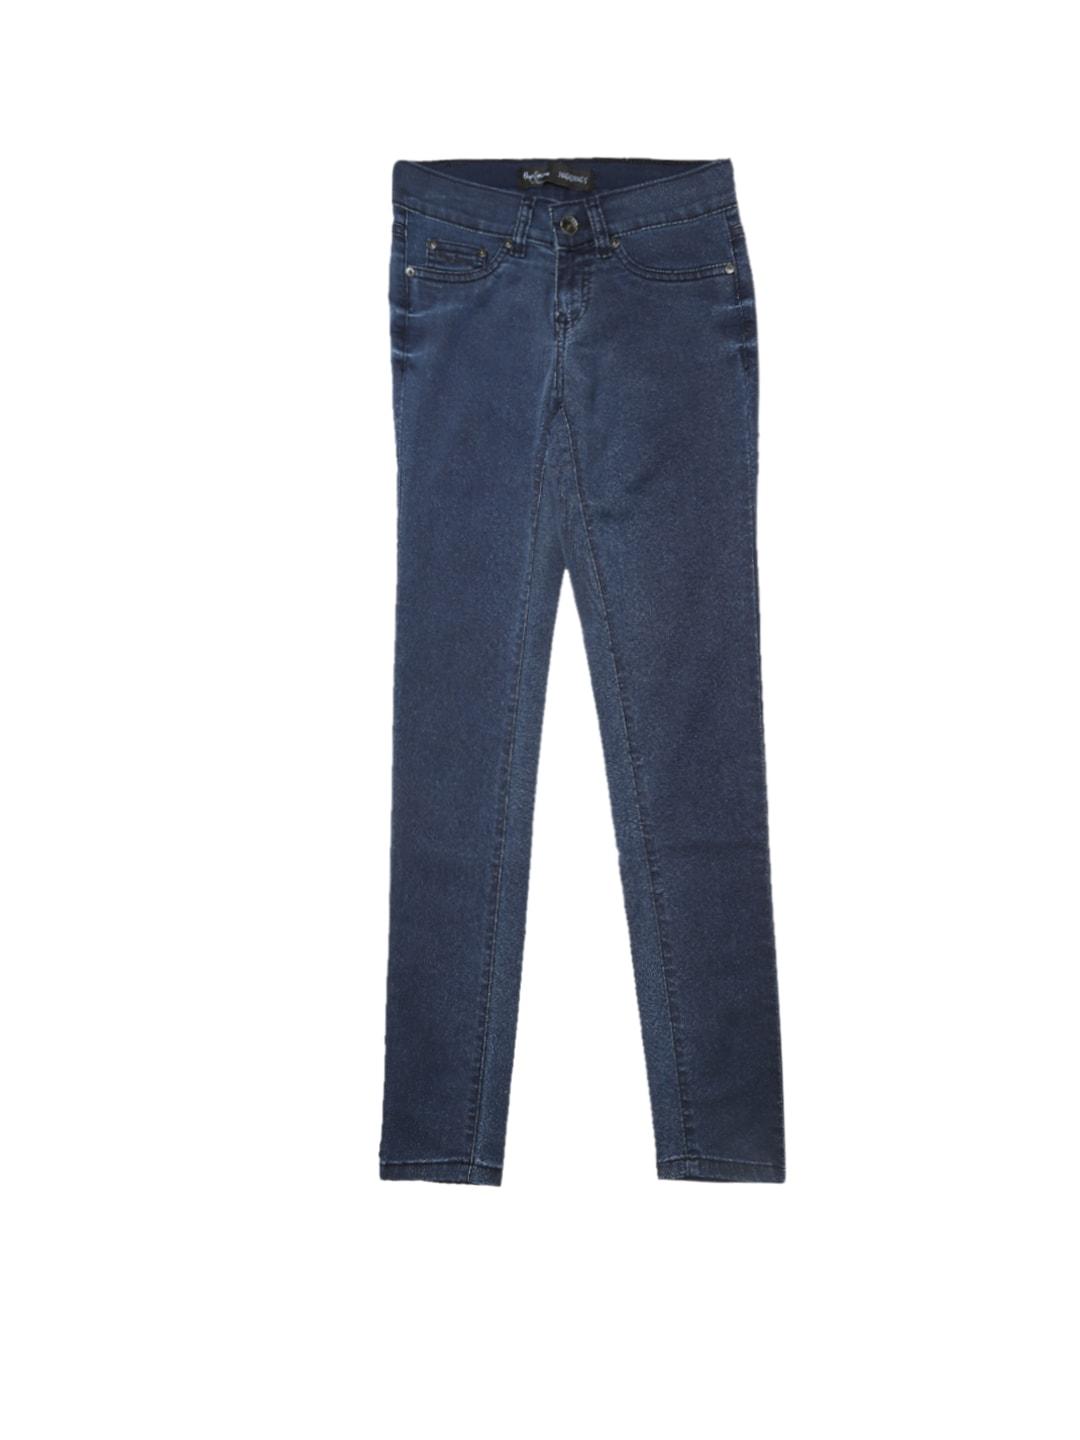 Pepe Jeans Blue Jeggings